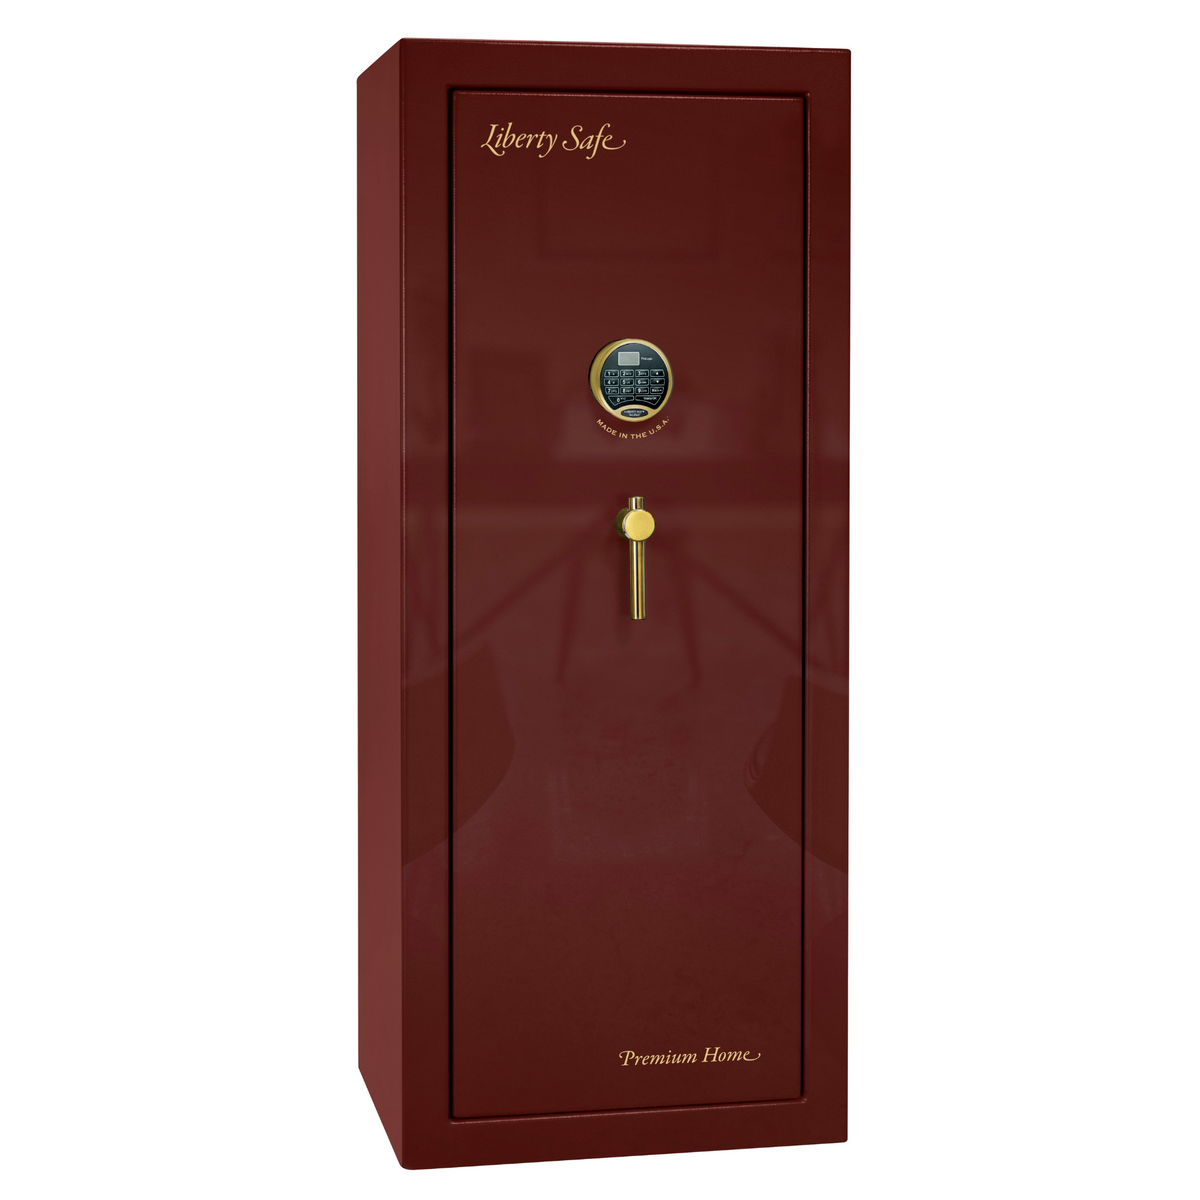 Premium Home Series | Level 7 Security | 2 Hour Fire Protection | 17 | Dimensions: 60.25&quot;(H) x 24.5&quot;(W) x 19&quot;(D) | Burgundy Gloss Brass - Closed Door